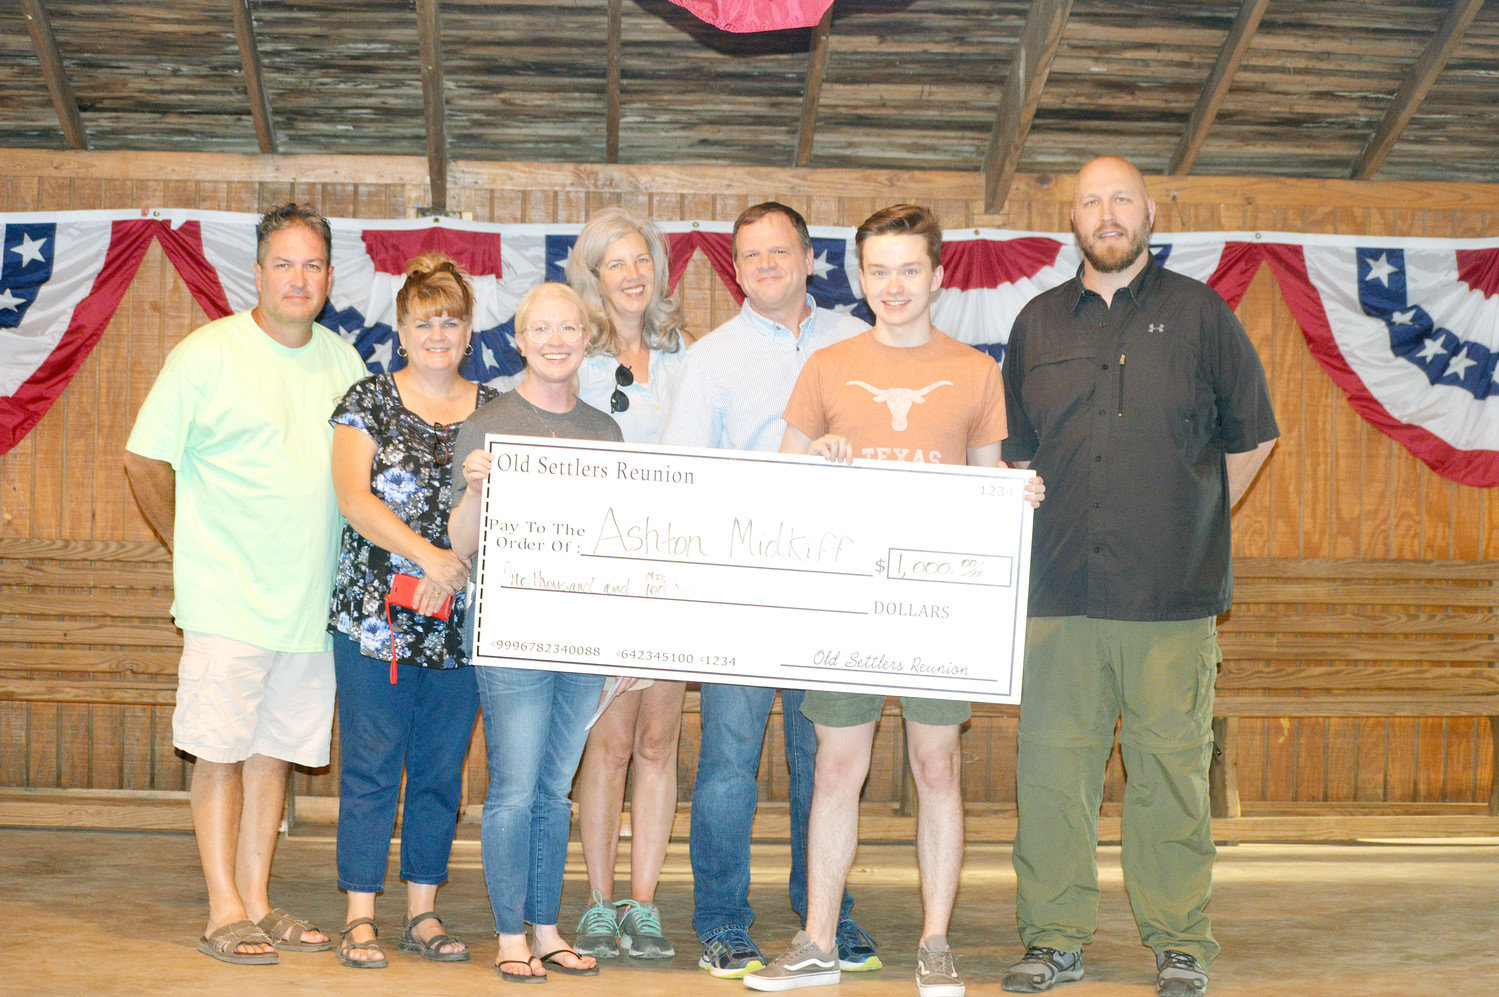 Quitman High School graduate Ashton Midkiff received a $1,000 scholarship from the Old Settlers Reunion Association which he will use this fall at the University of Texas. Pictured here are association board members Joe Wayne Reynolds, Laura Weems, Alice Bower, Julie Sandifer, Kevin Cameron, Midkiff and David French.